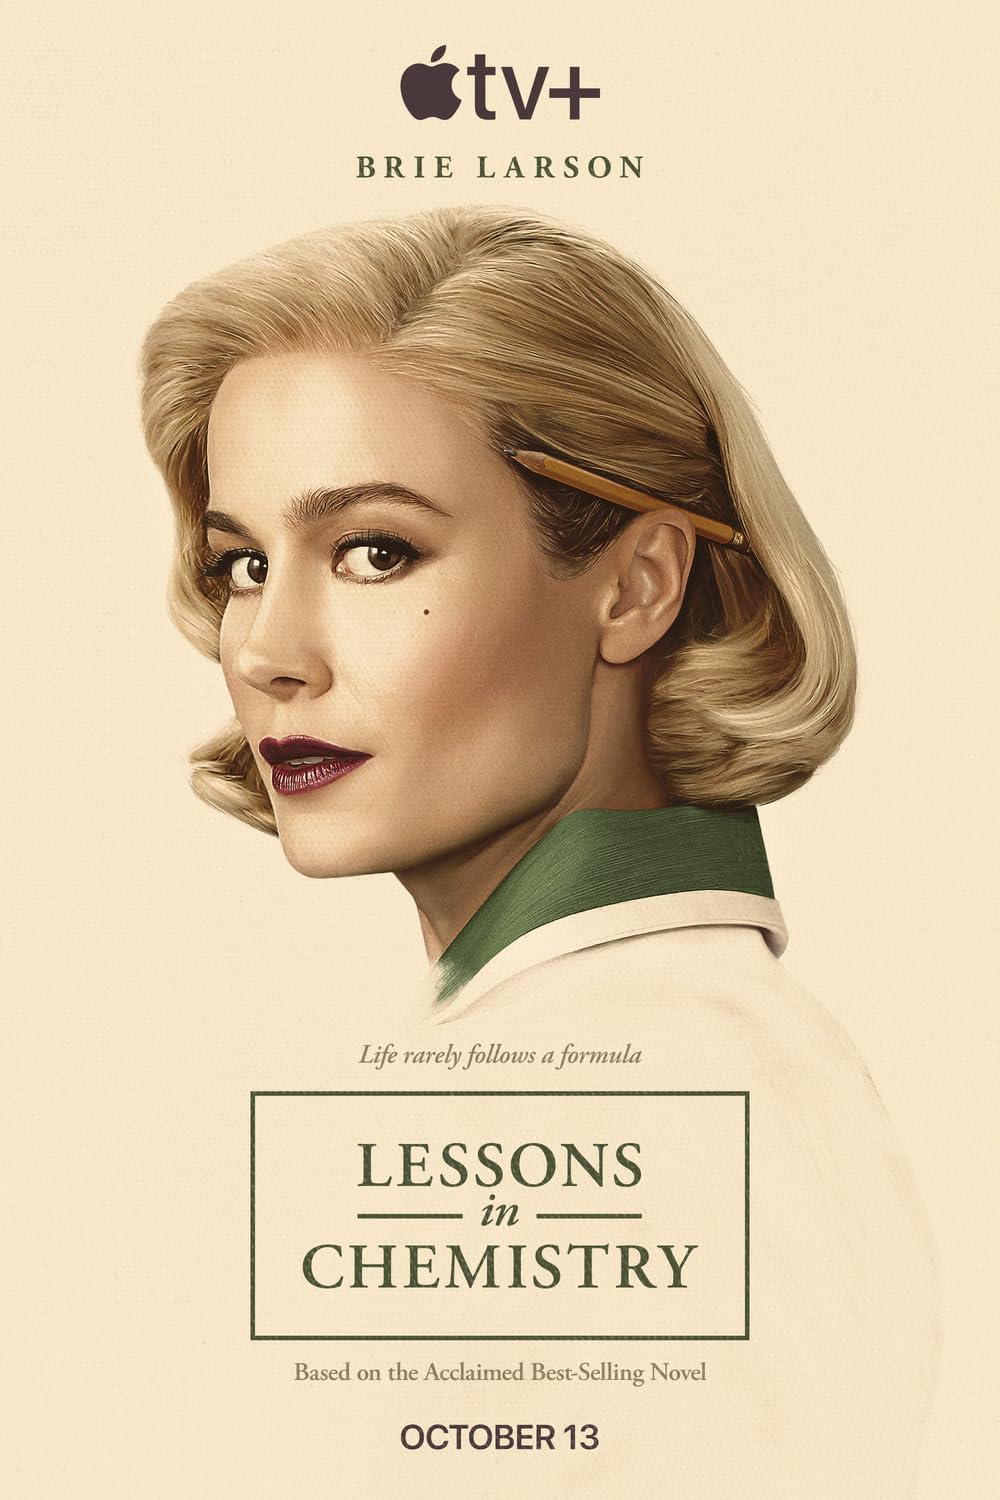 Lessons in Chemistry (October 13) - Streaming on Apple TV+*
Set in the 1950s, 